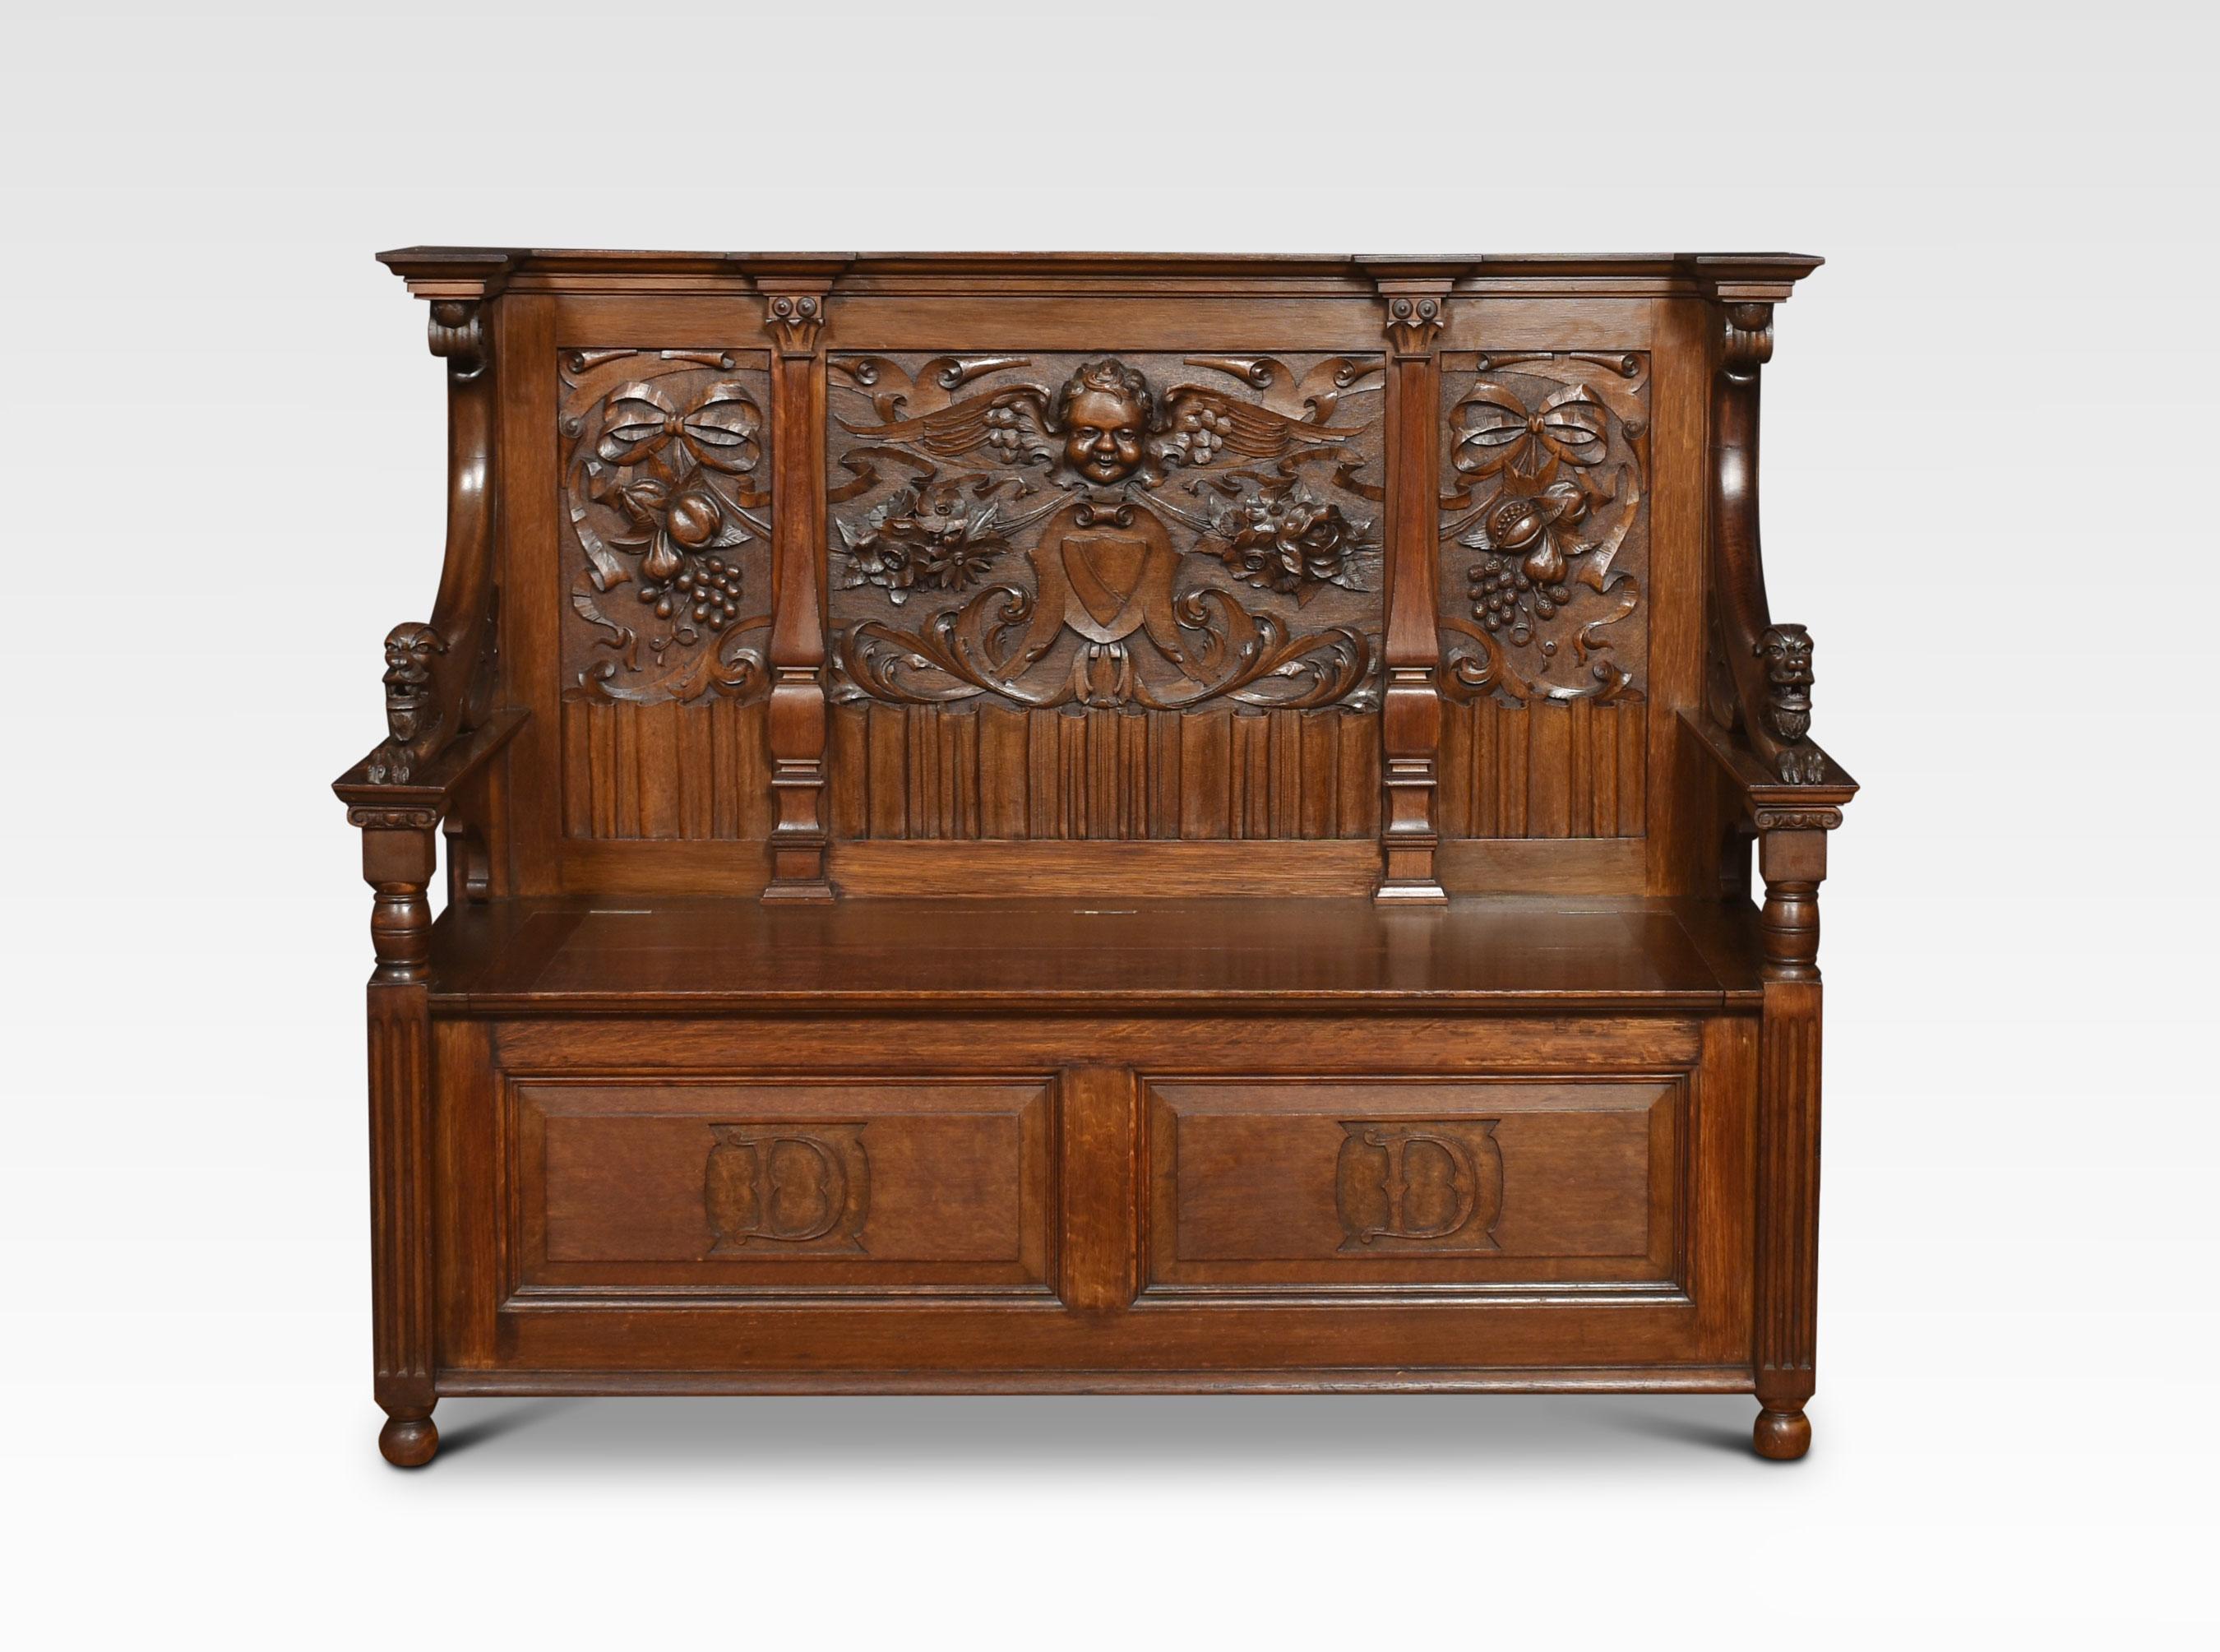 An oak hall settle the carved panelled back with a central cherub head surrounded by scrolling foliated detail. Flanked by lion-headed armrests. To the lift-up seat with a panelled base below all raised up on turned feet.
Dimensions
Height 45